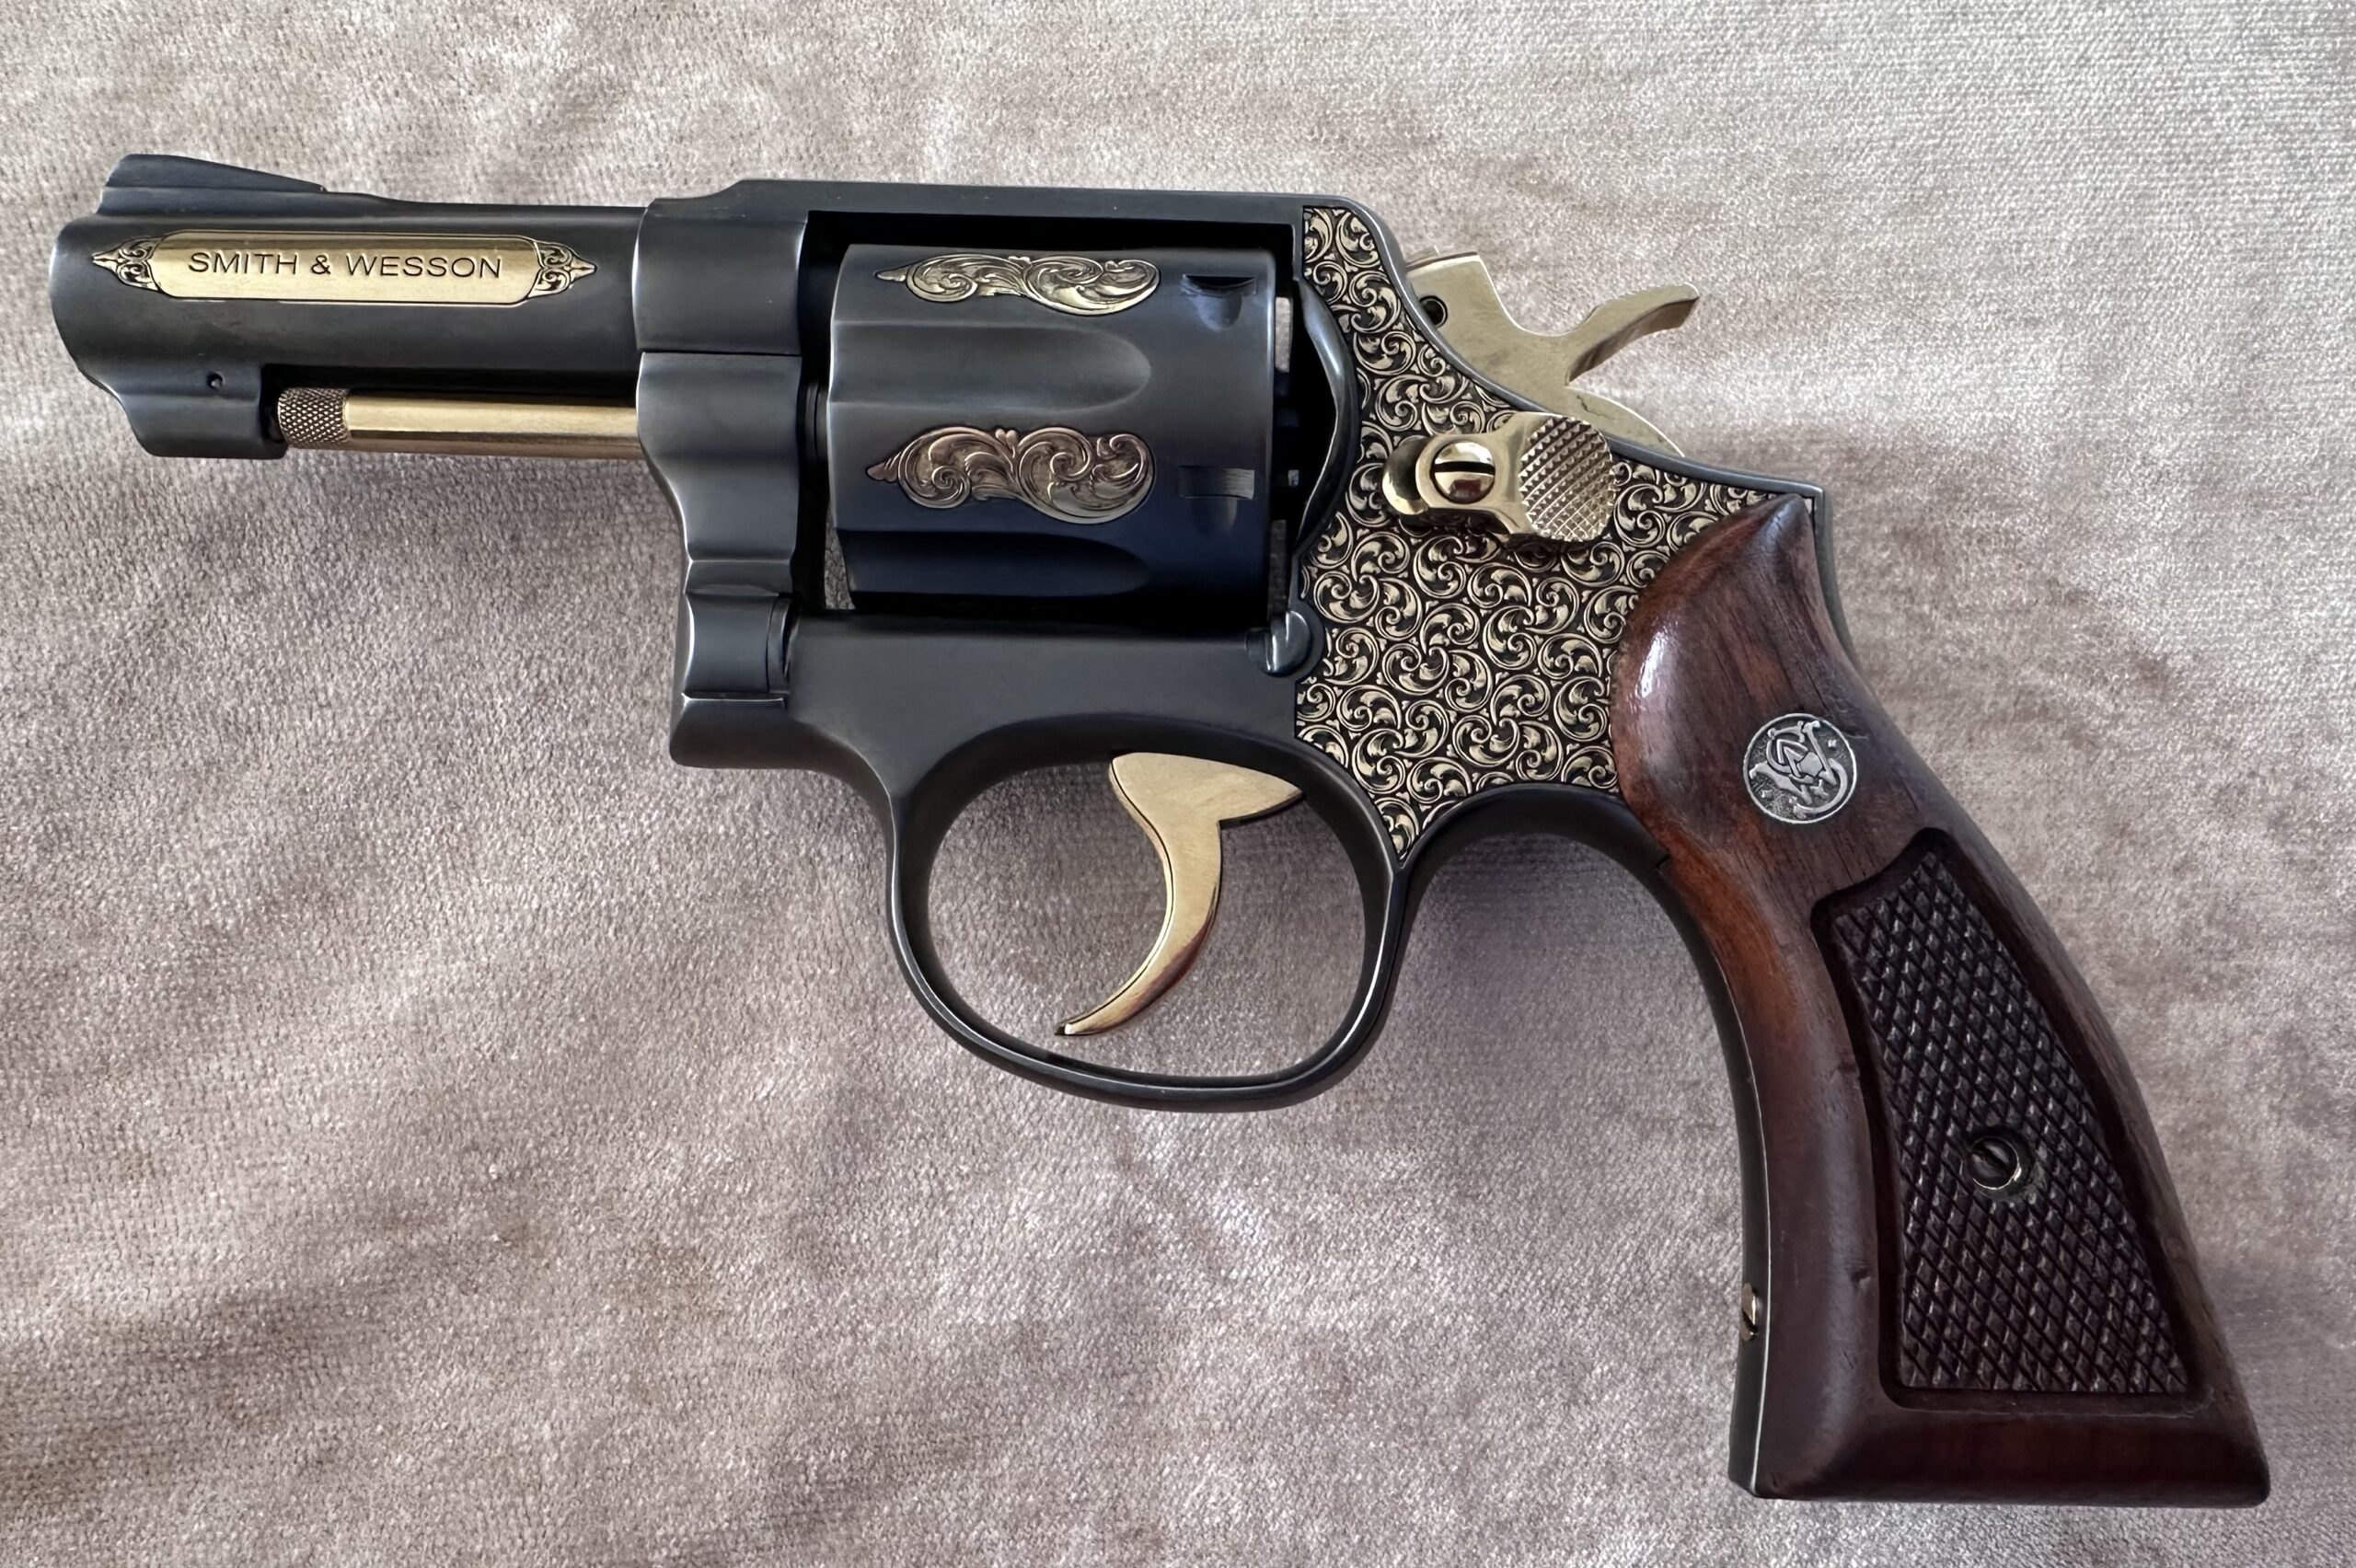 38 Cal Smith&Wesson